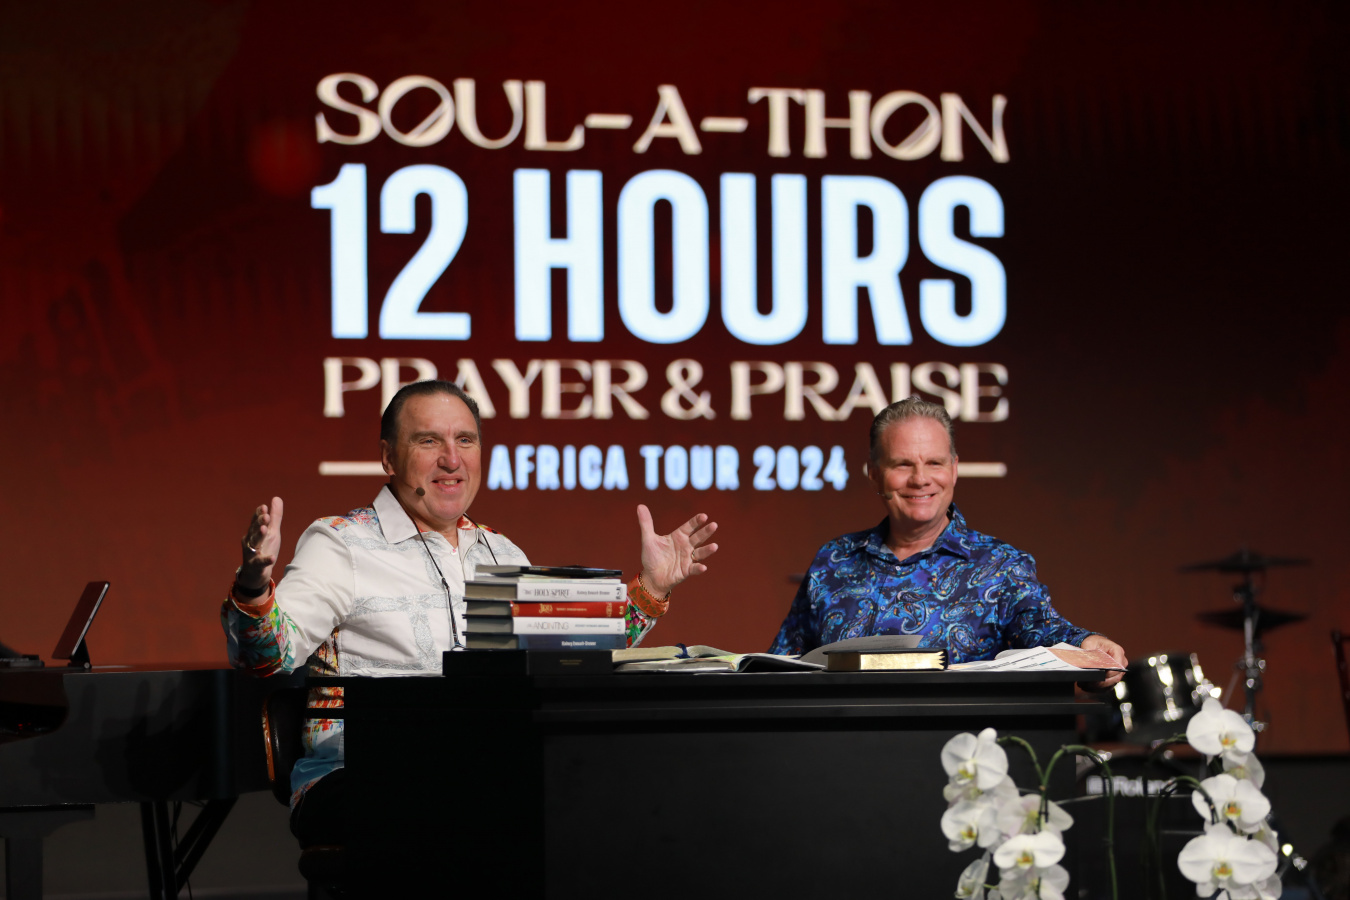 12 Hours of Prayer Soul- A- Thon